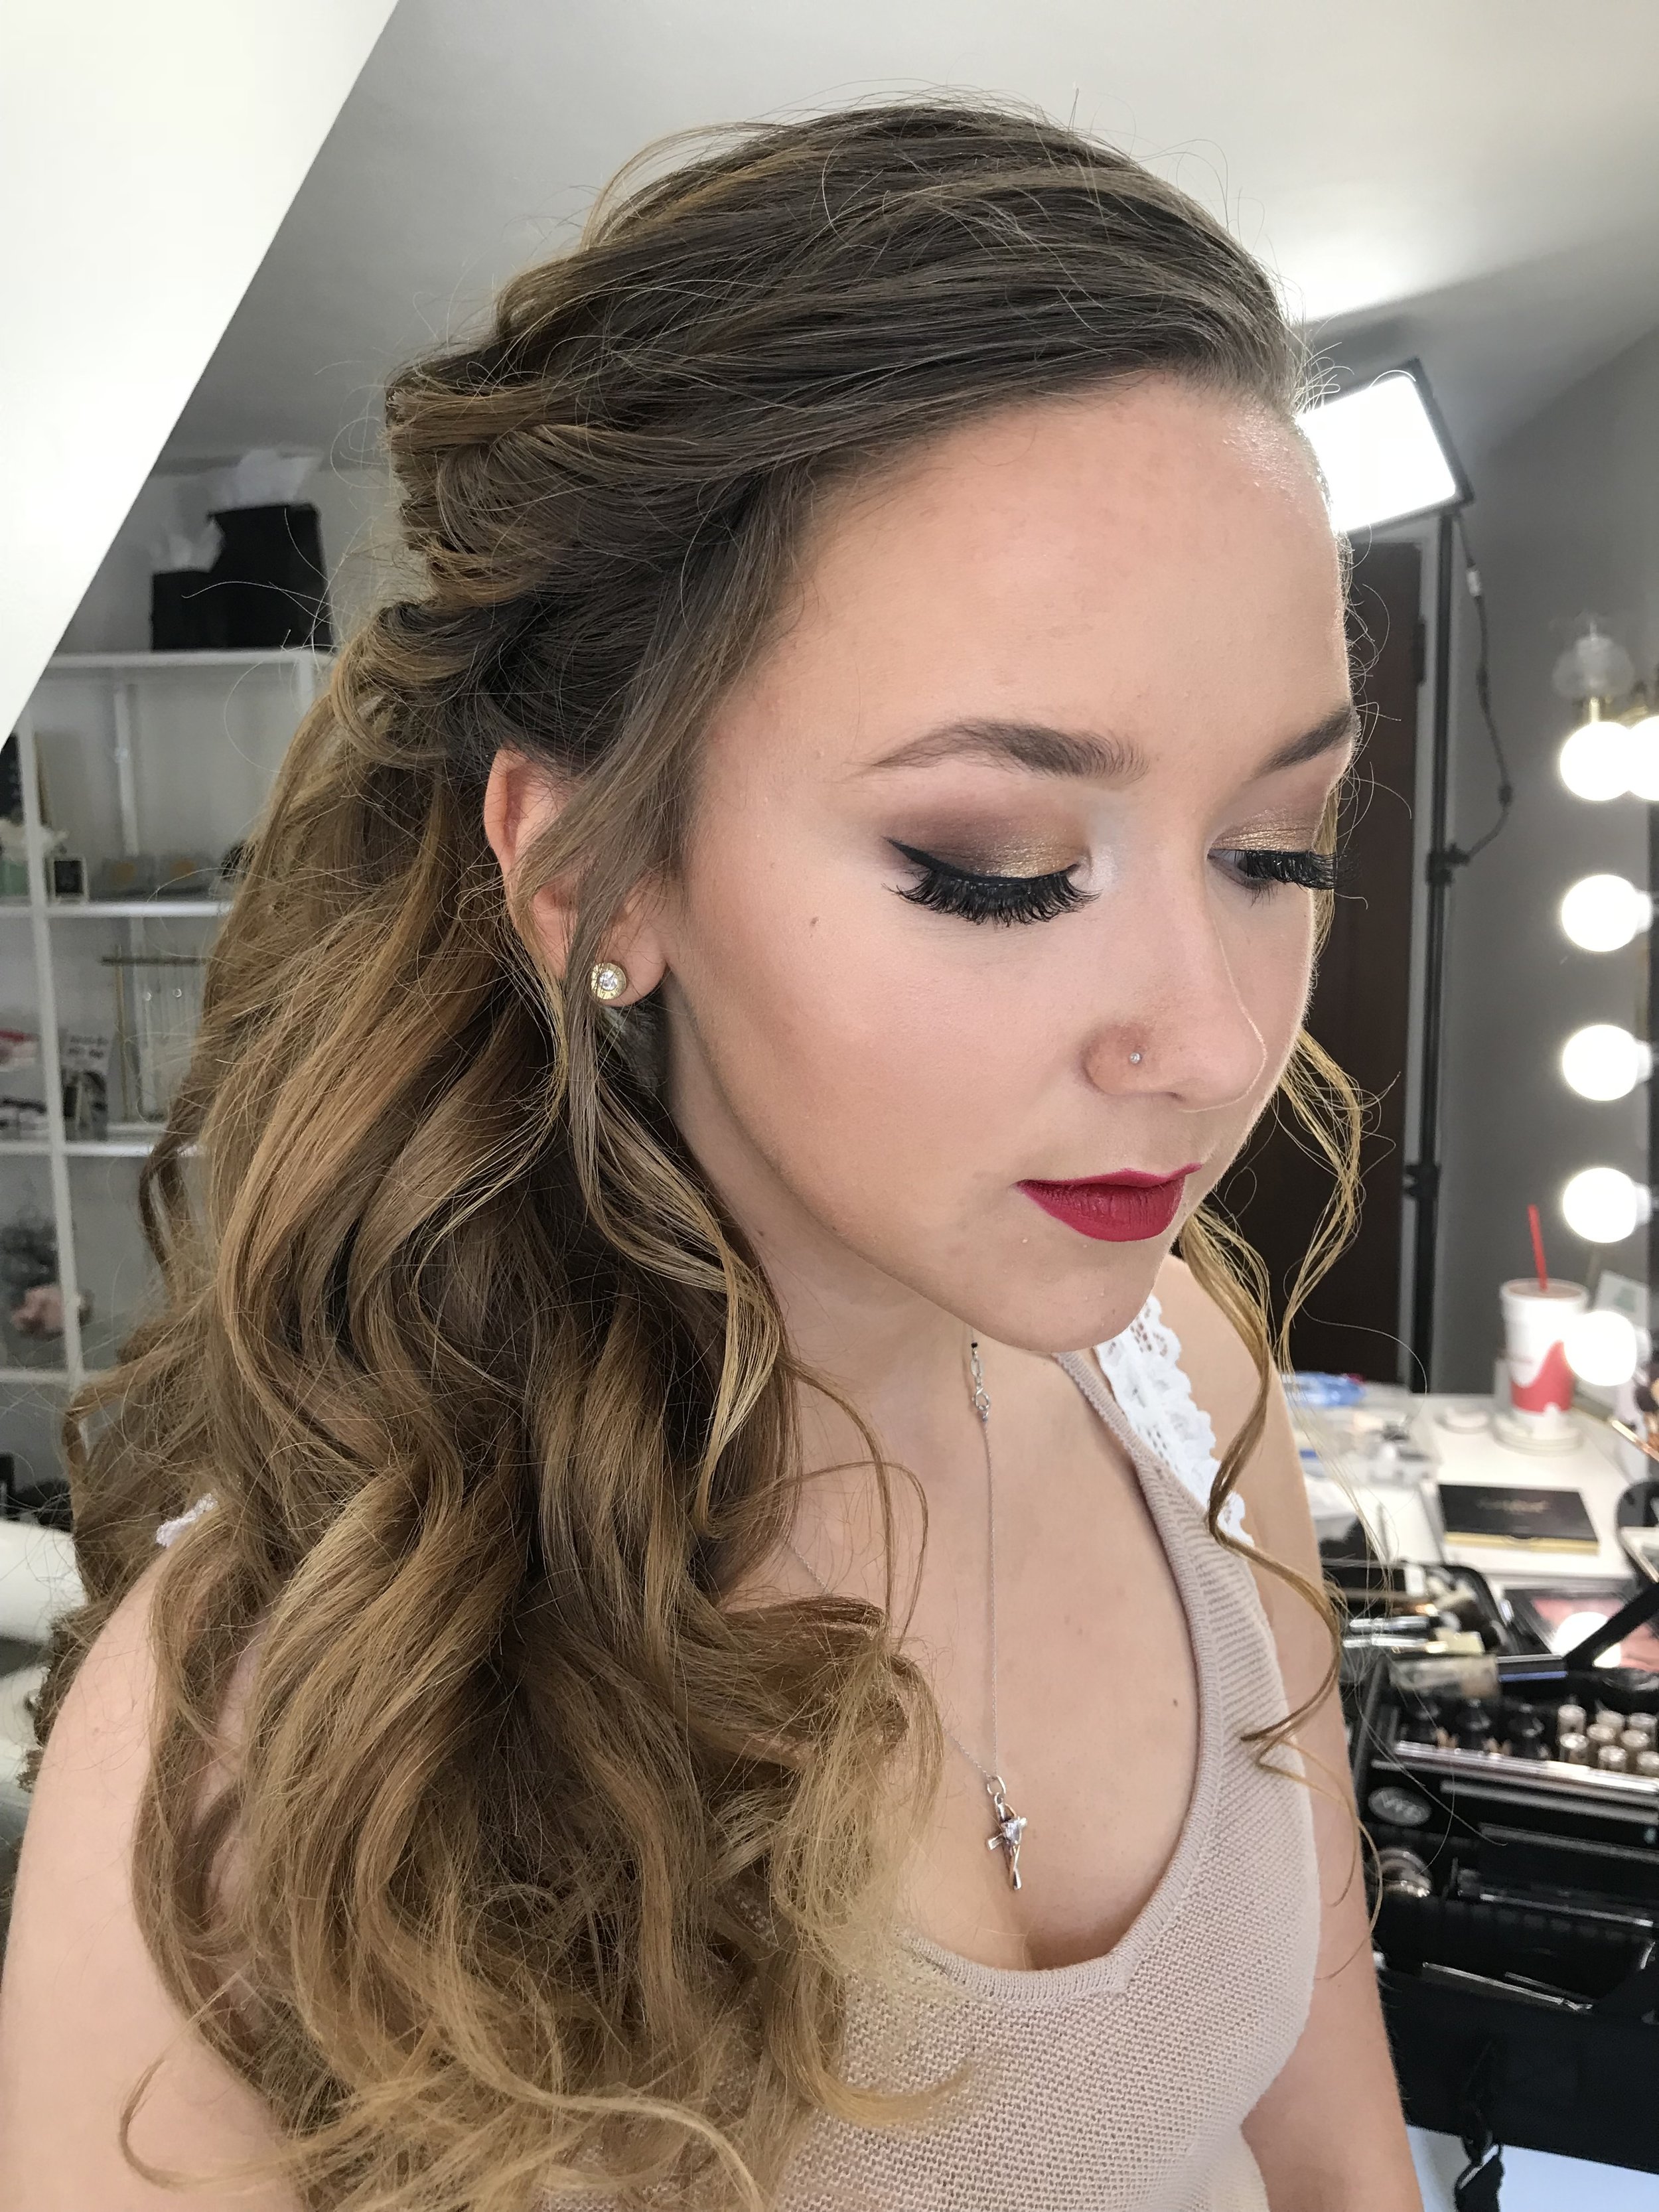 Beauty by Dae Prom Makeup | Connecticut Makeup, Lash, Wax